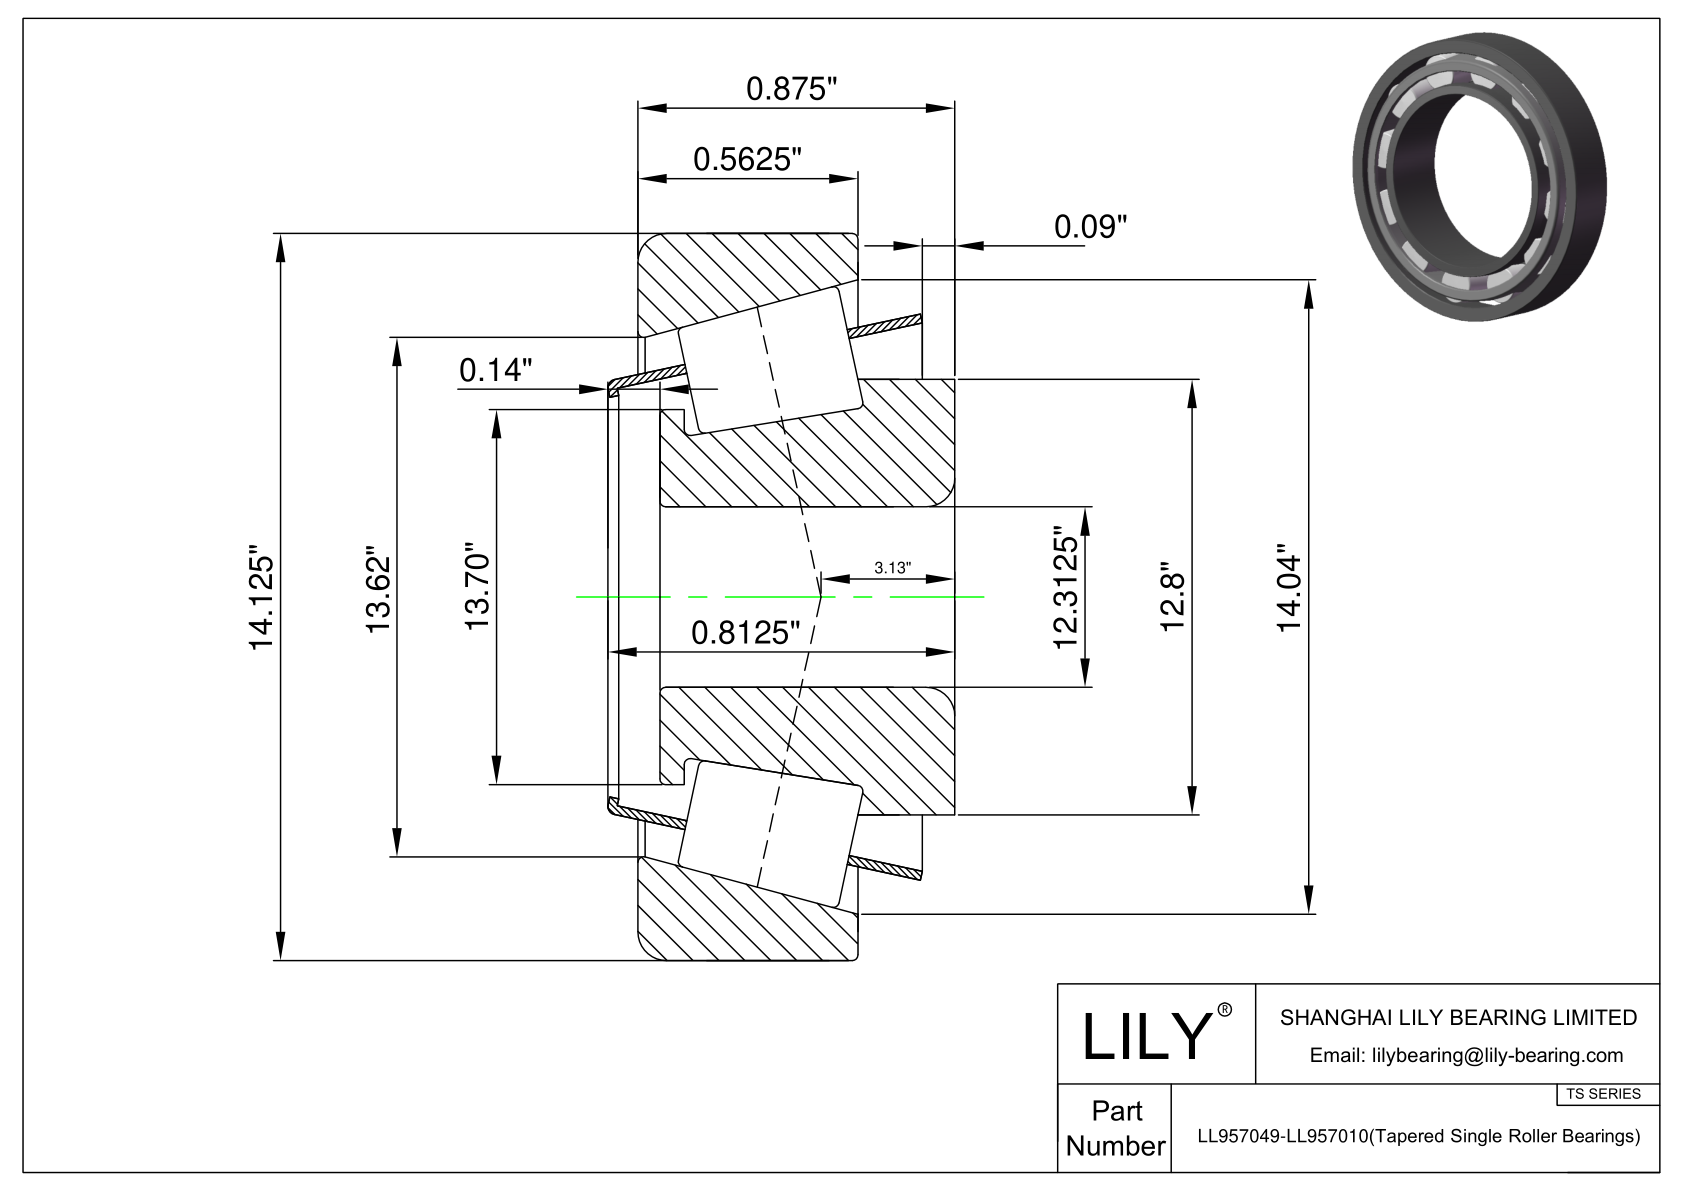 LL957049-LL957010 TS (Tapered Single Roller Bearings) (Imperial) cad drawing